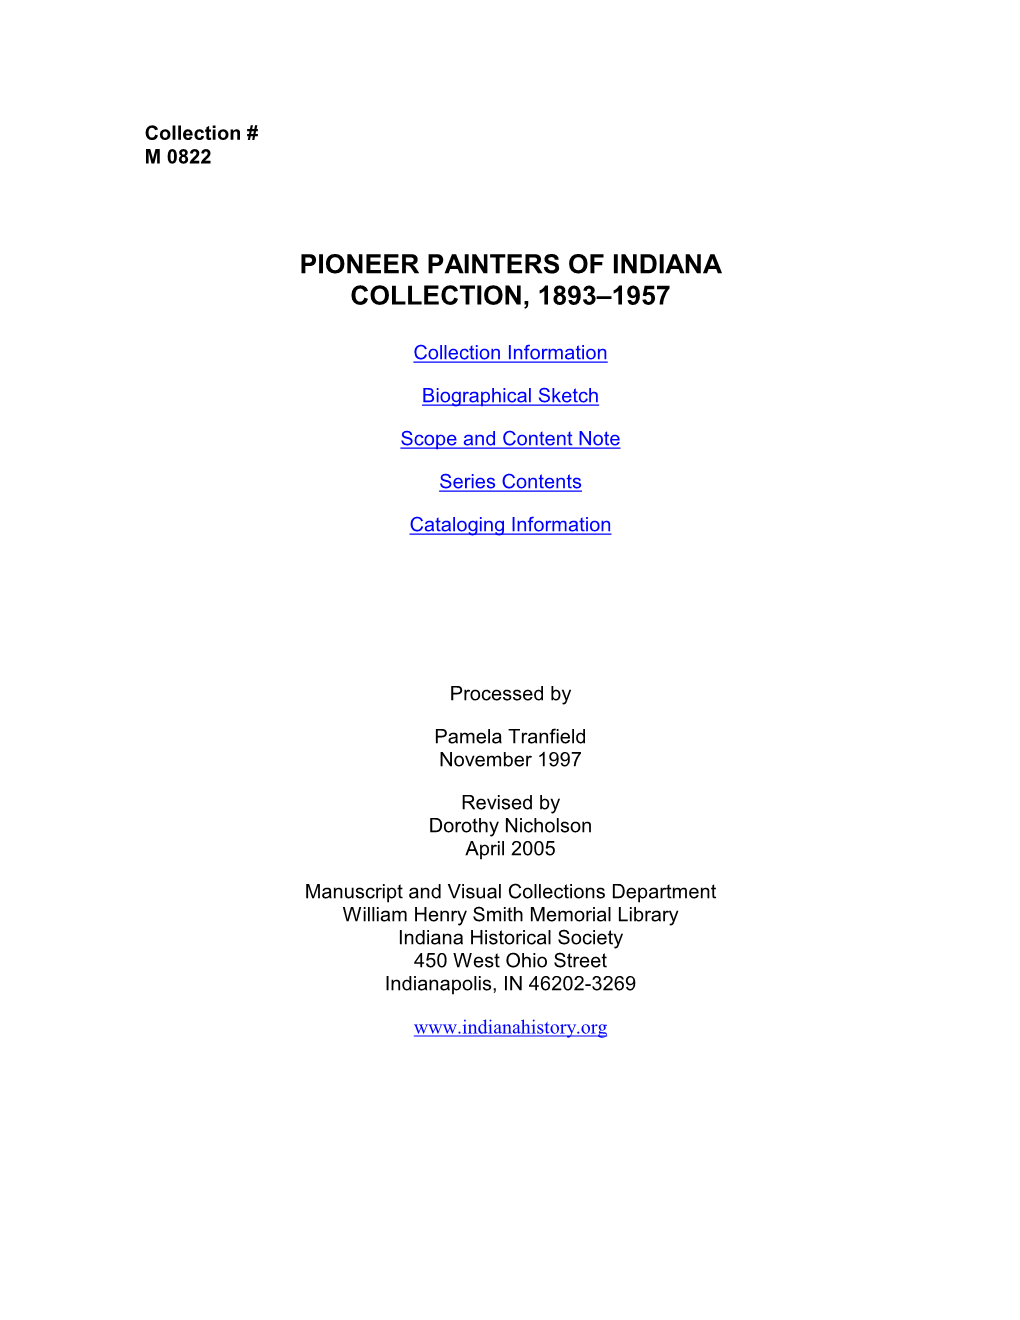 Pioneer Painters of Indiana Collection, 1893–1957